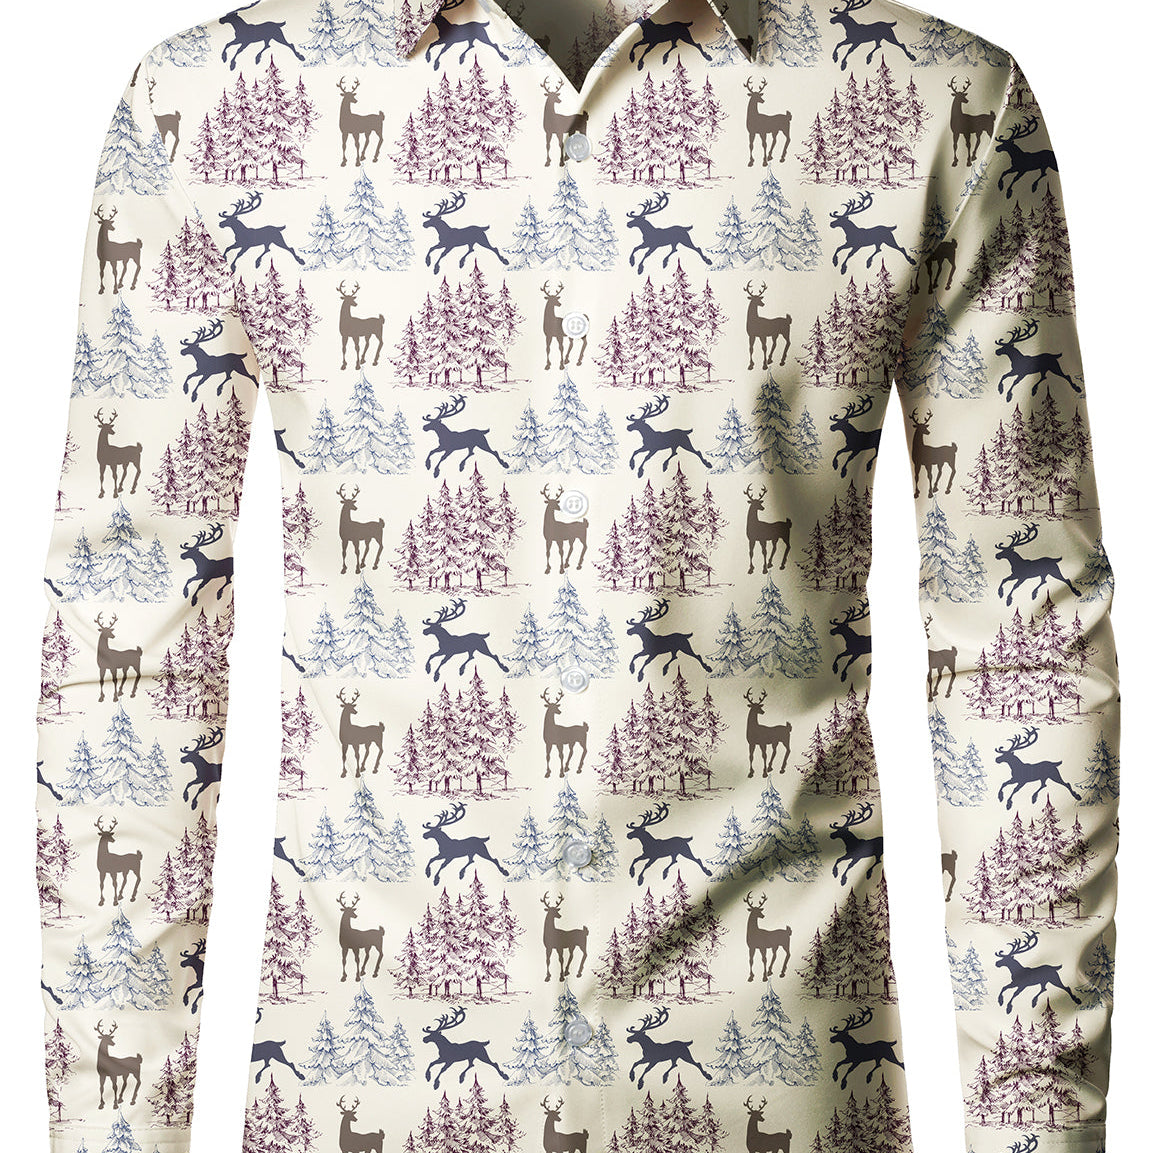 Men's Christmas Elk Print Holiday Party Button Up Long Sleeve Shirt